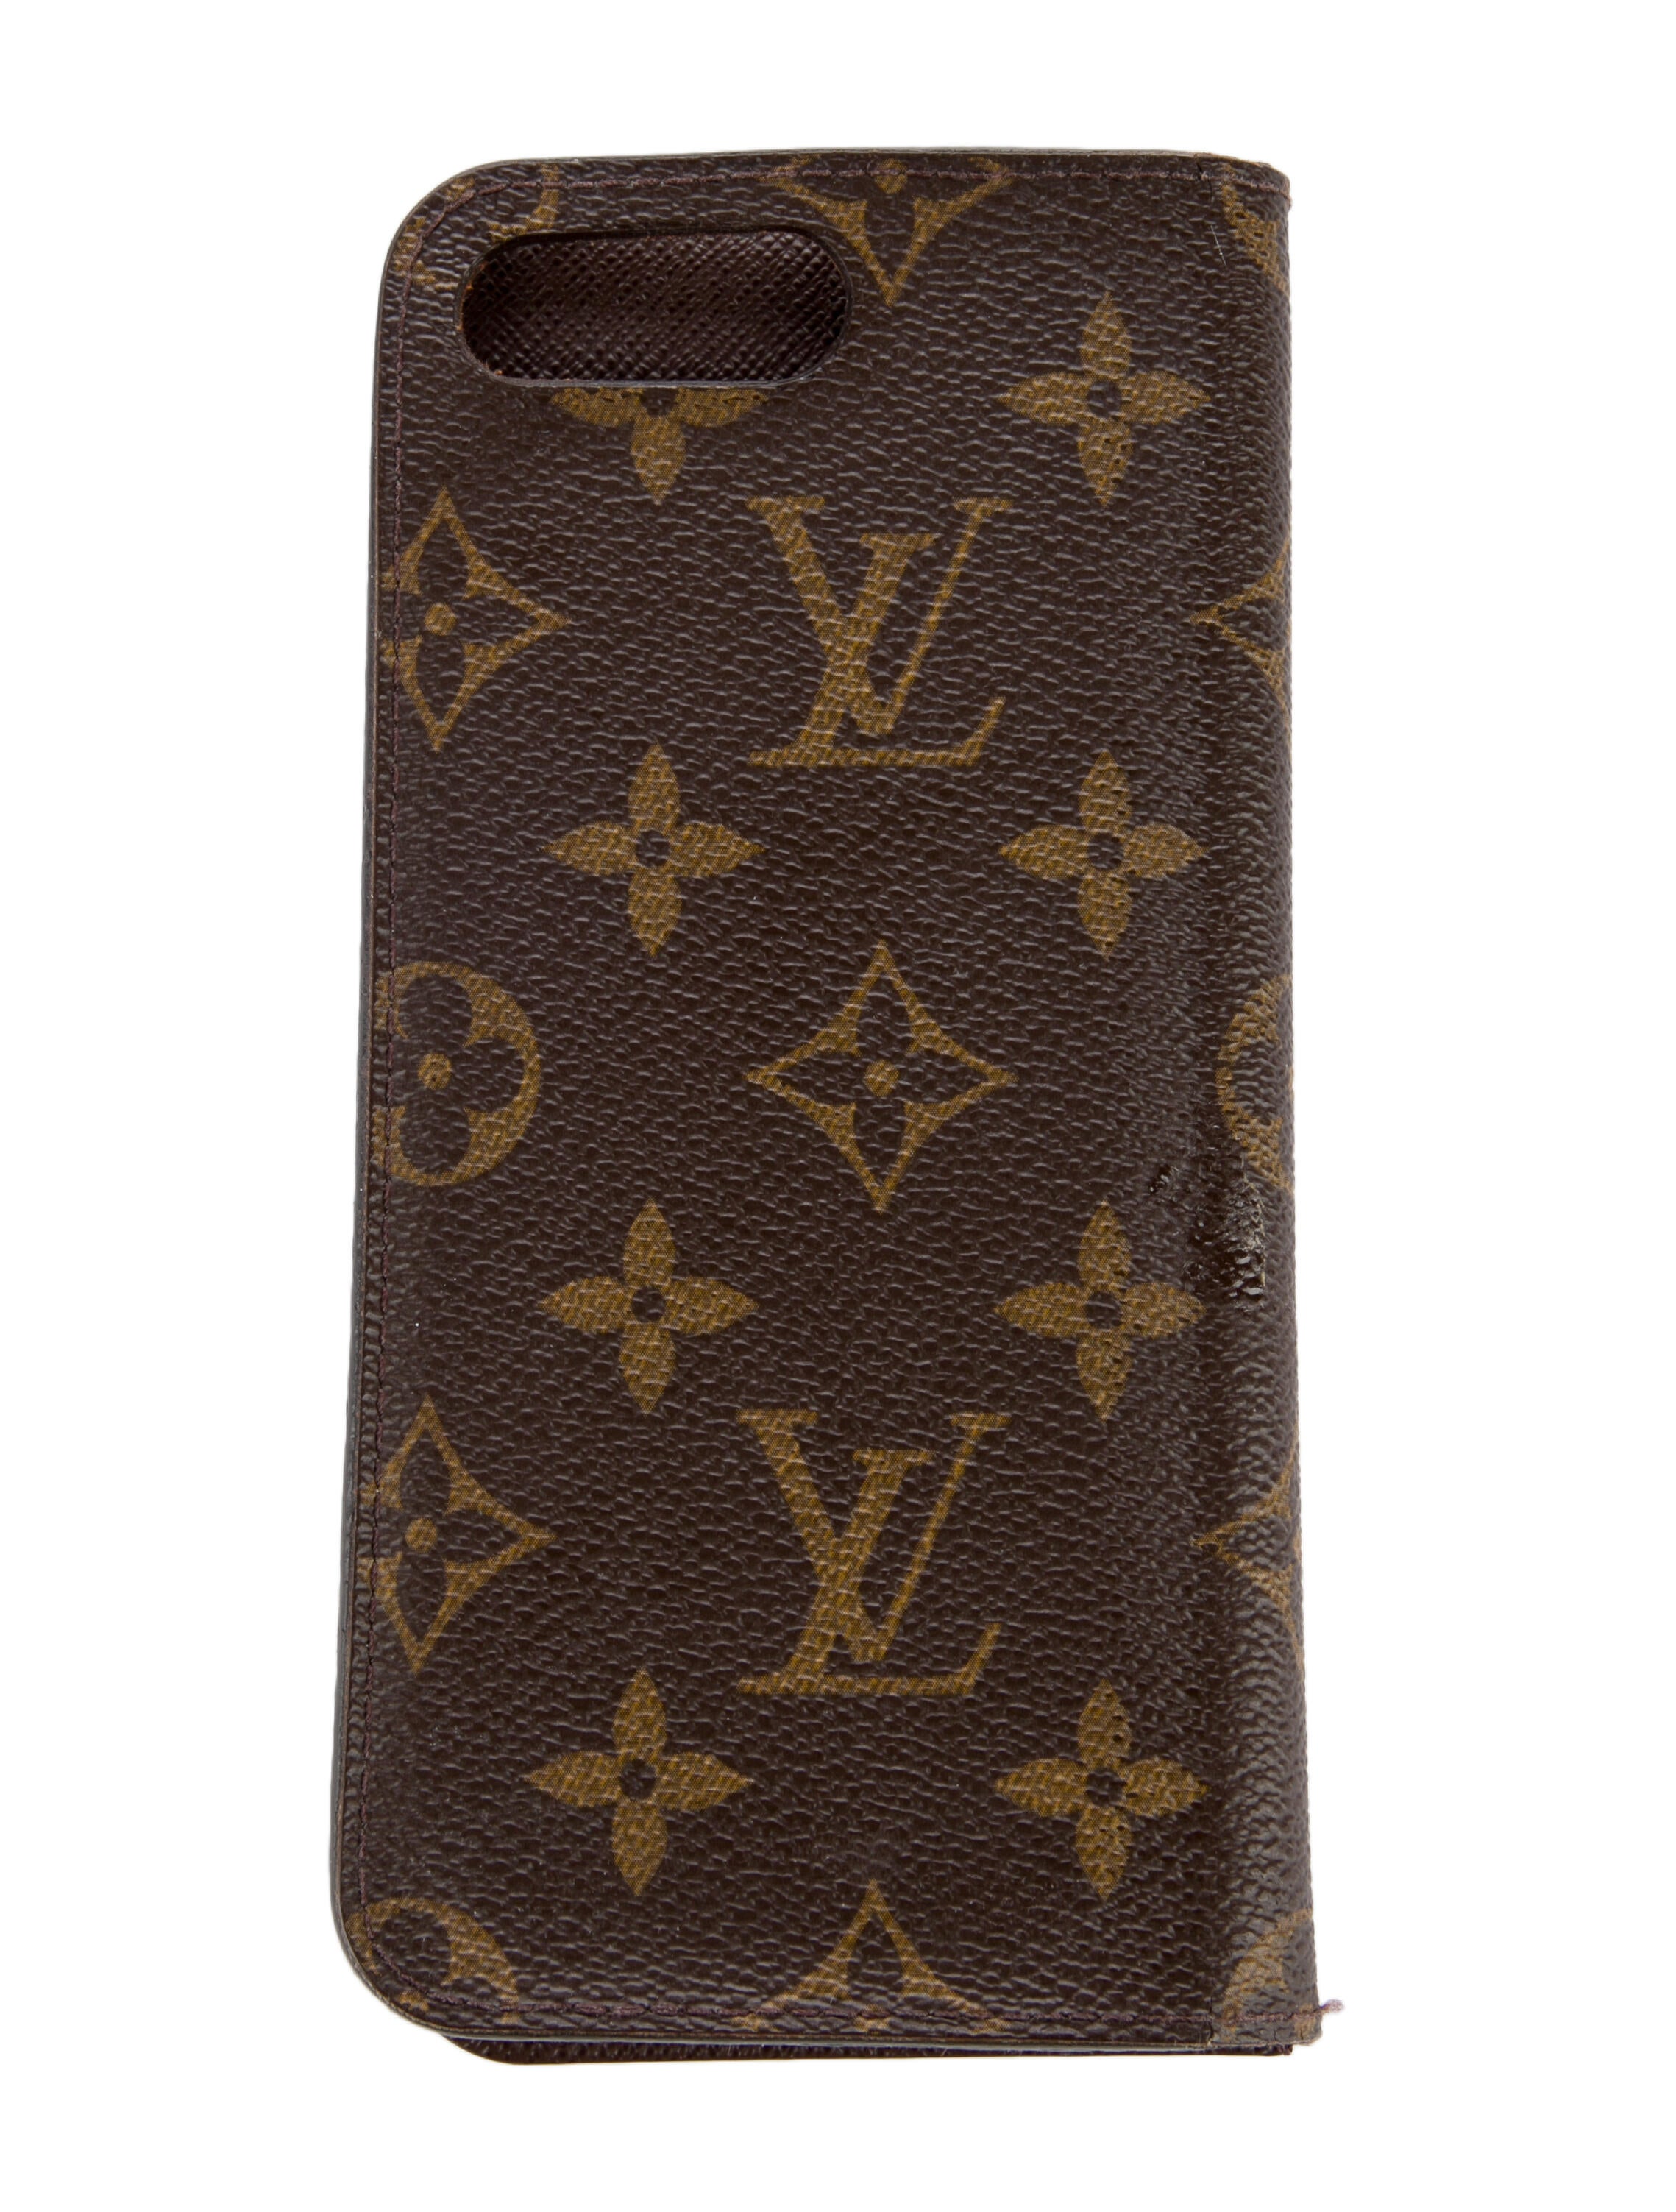 What's The Cheapest Louis Vuitton Item